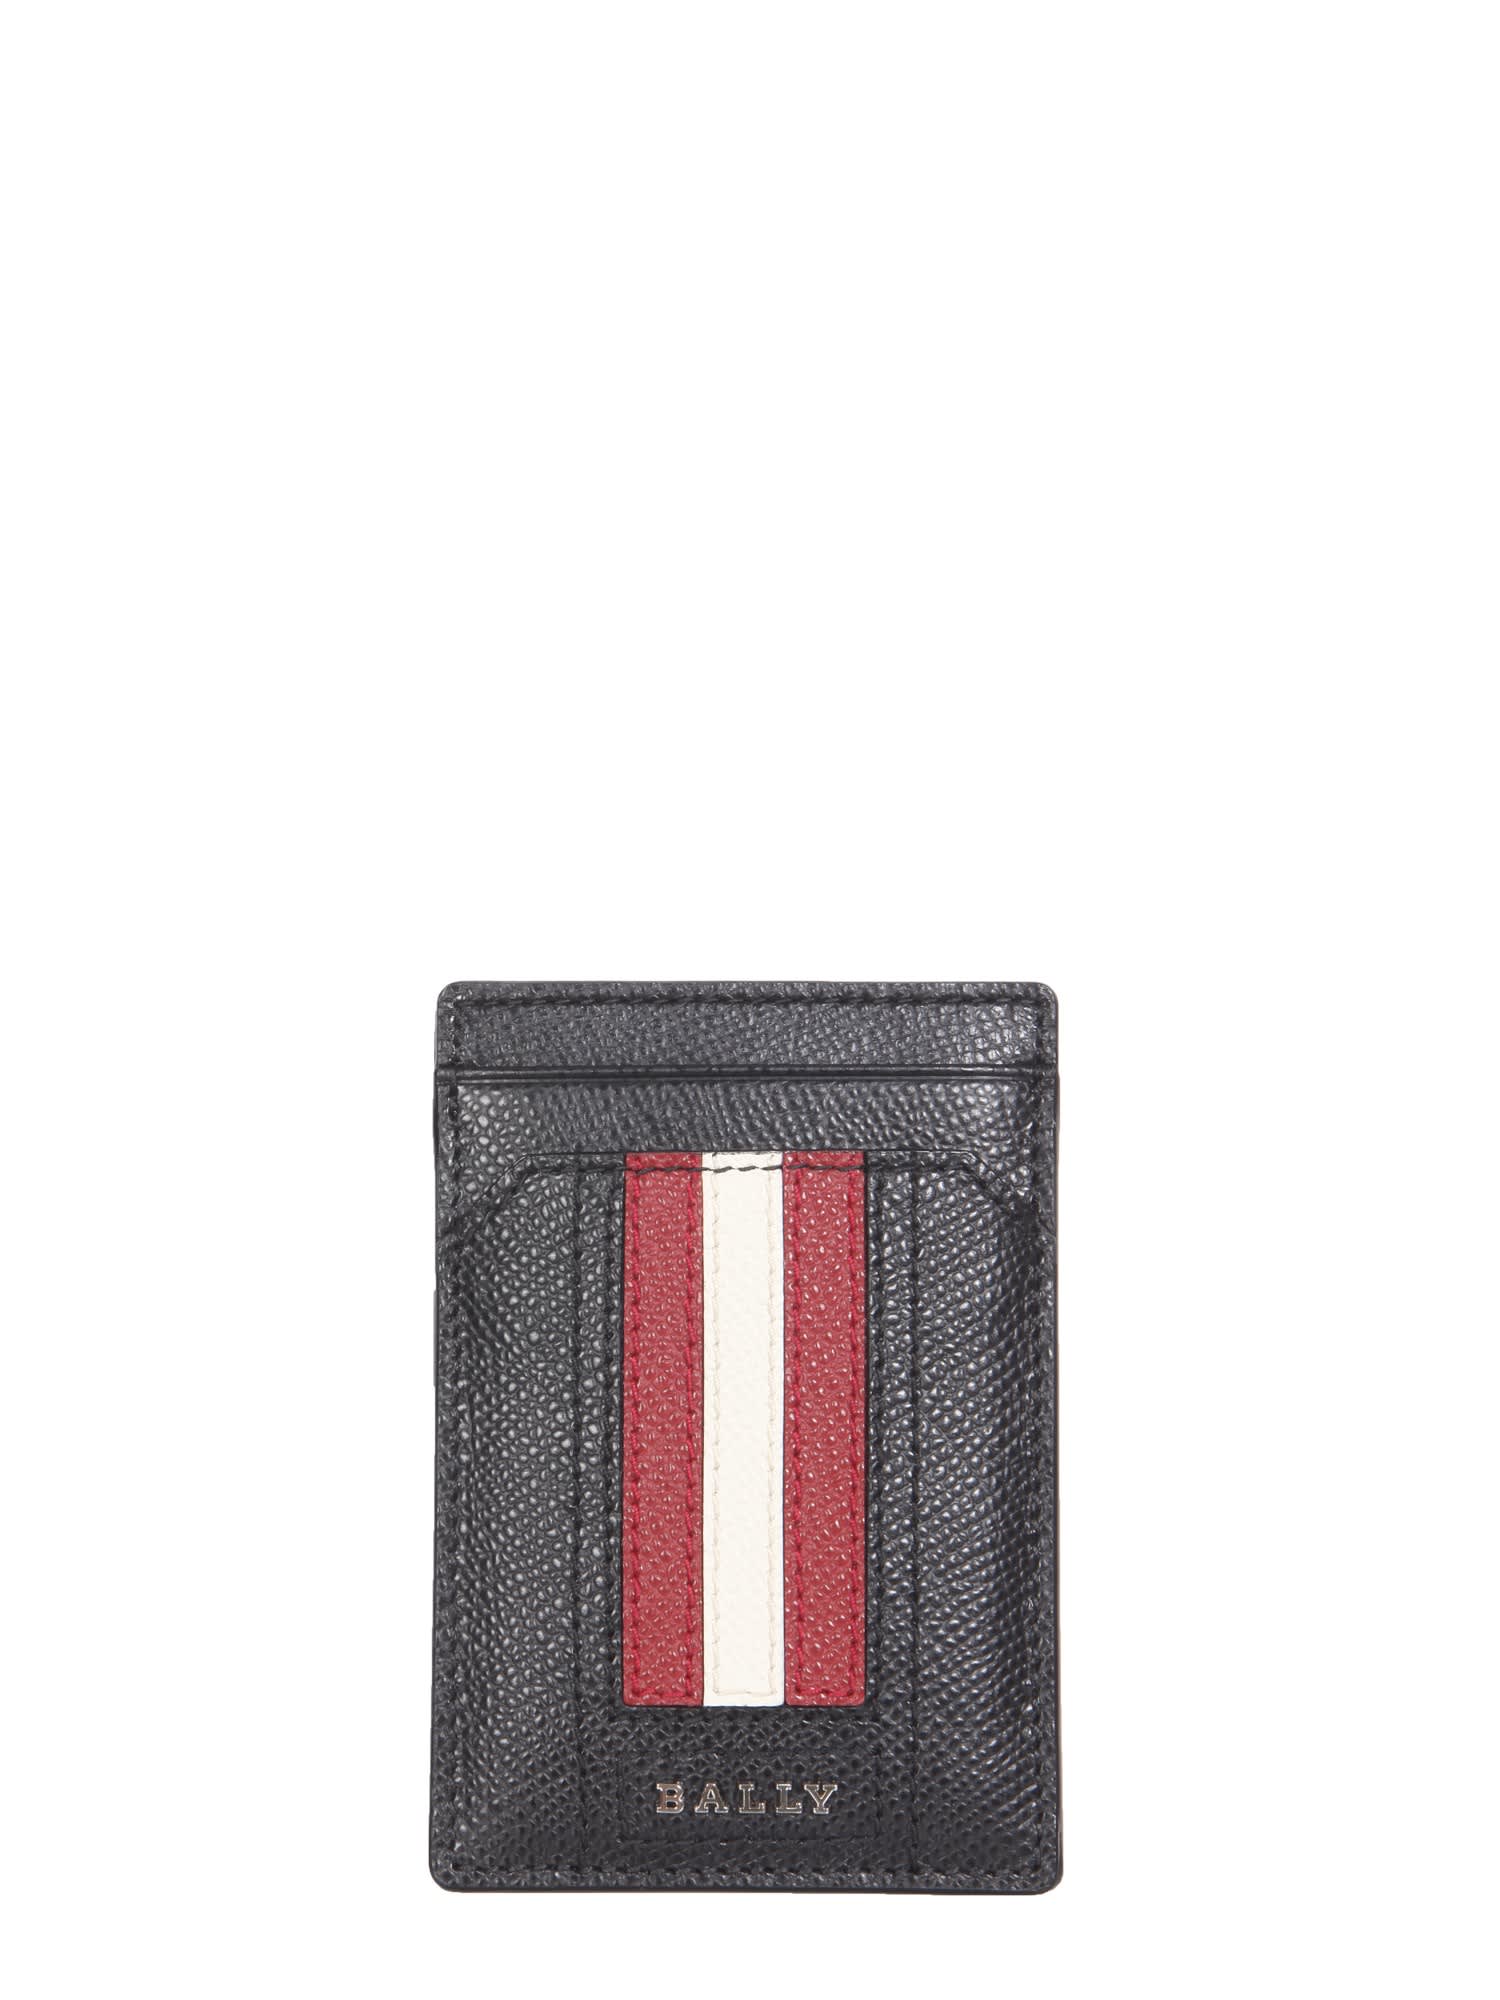 Bally Hammered Leather Card Holder